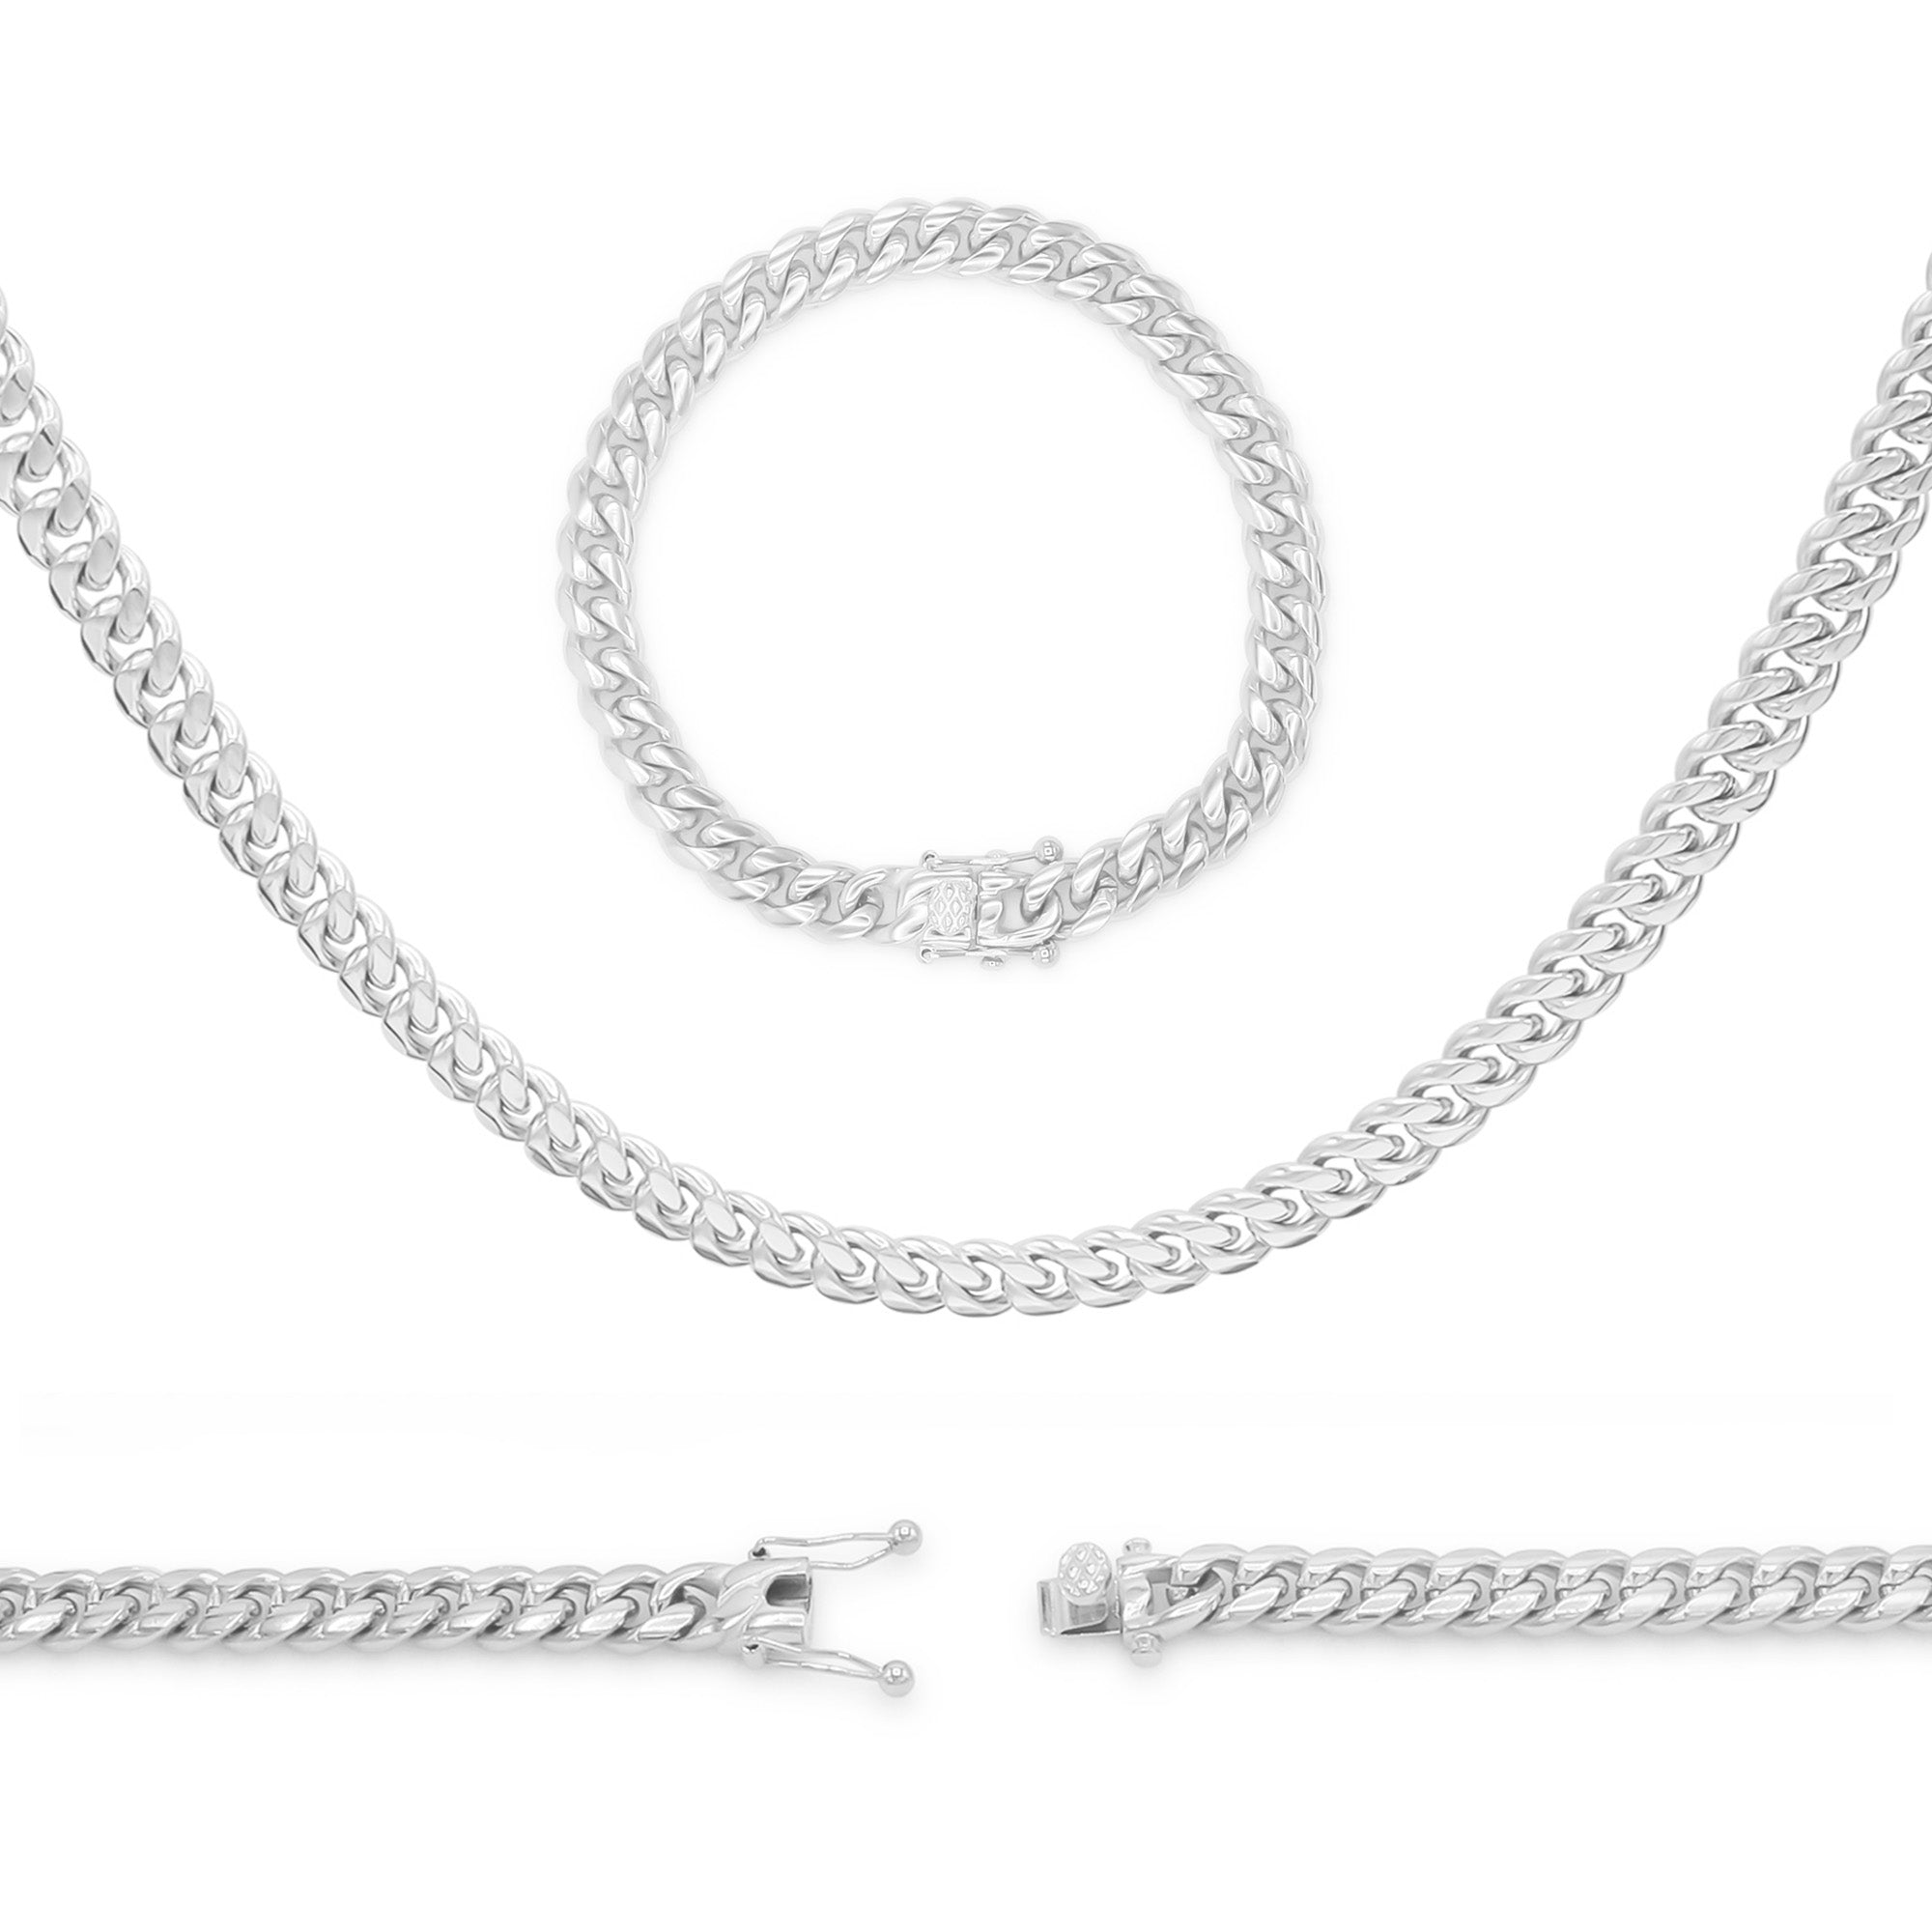 Buy Necklace for Men Cuban Link Chain Polishing Silver Stainless Steel Curb  Link Chain Necklace Men's Necklace Jewelry, 16-40